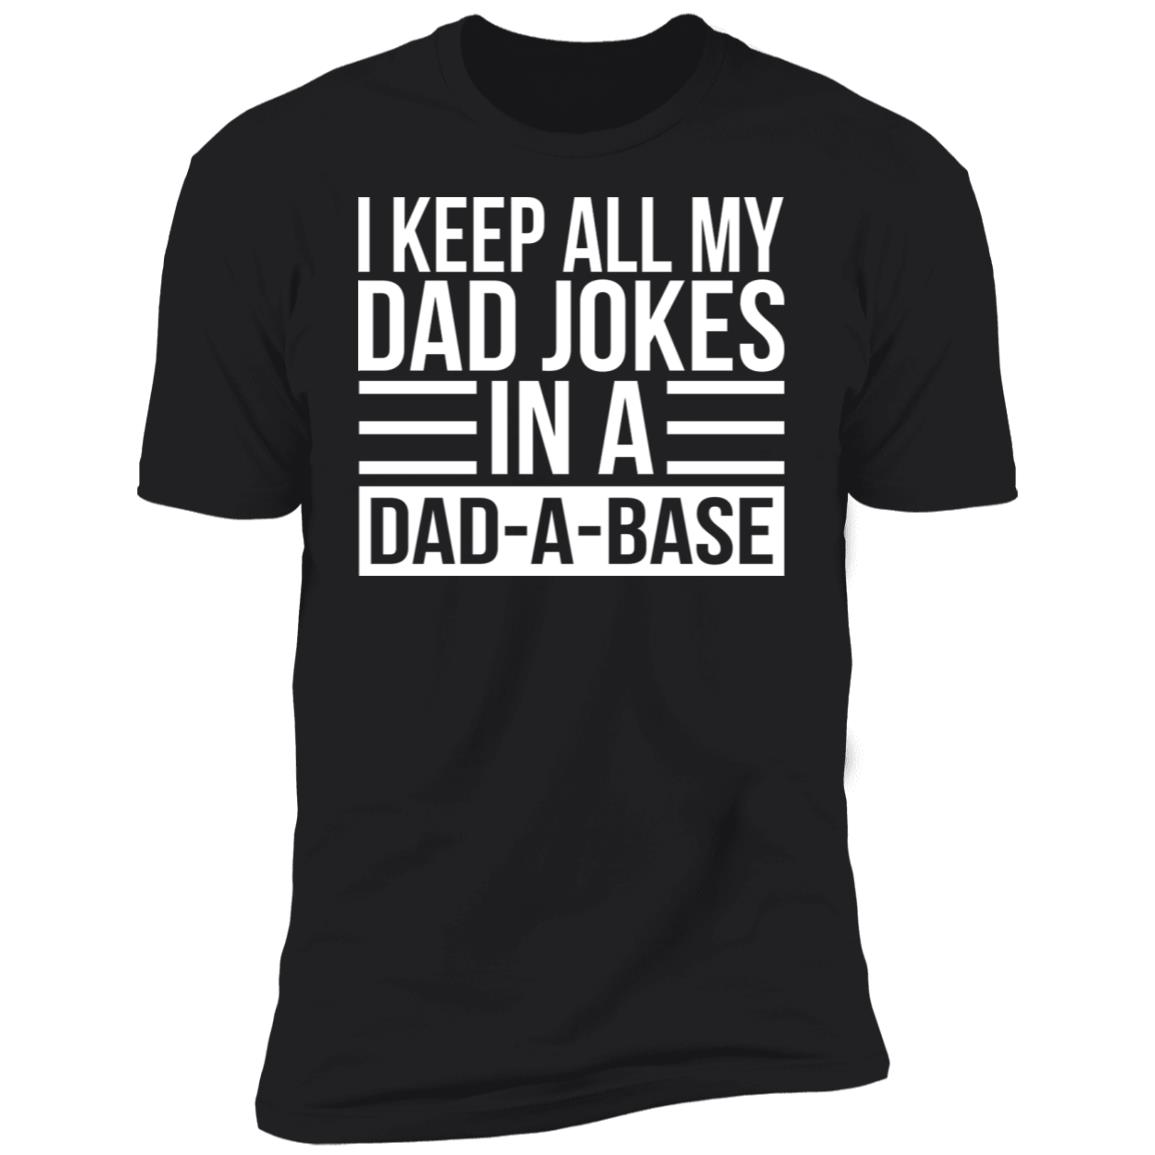 I Keep All My Dad Jokes In A Dad-A-Base Shirt | Allbluetees.com